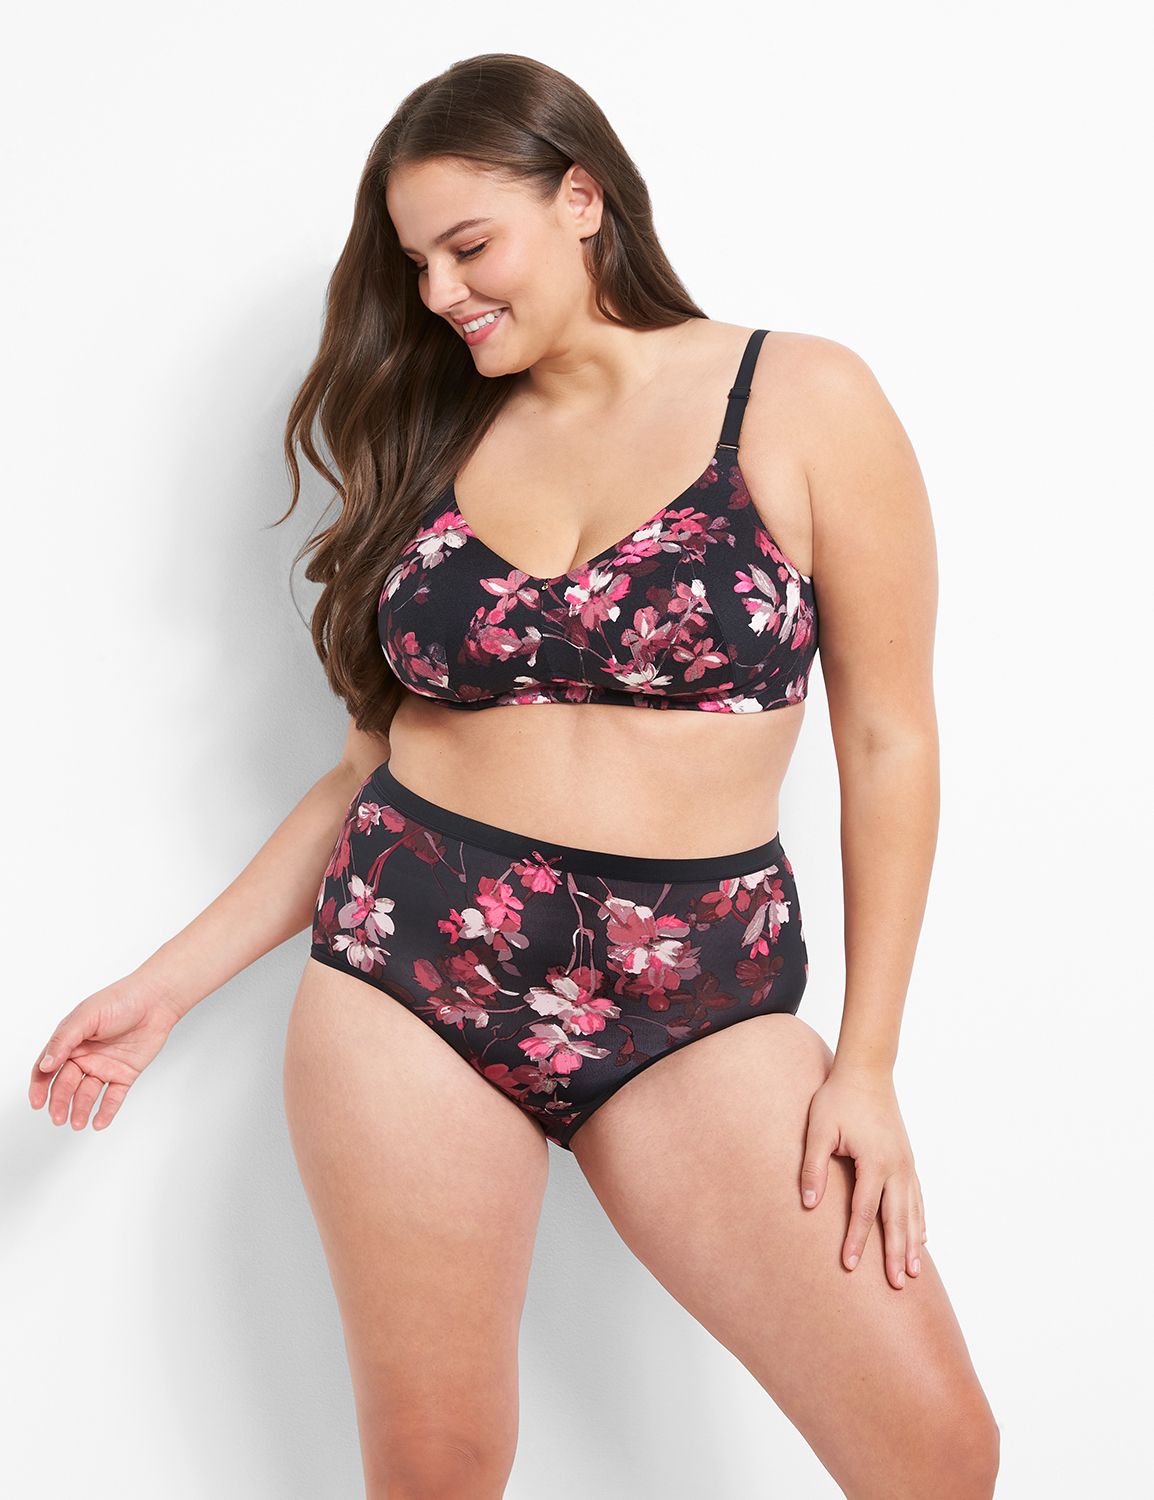 Only 2x a year! Bras under $20. SEMI-ANNUAL SALE! - Cacique